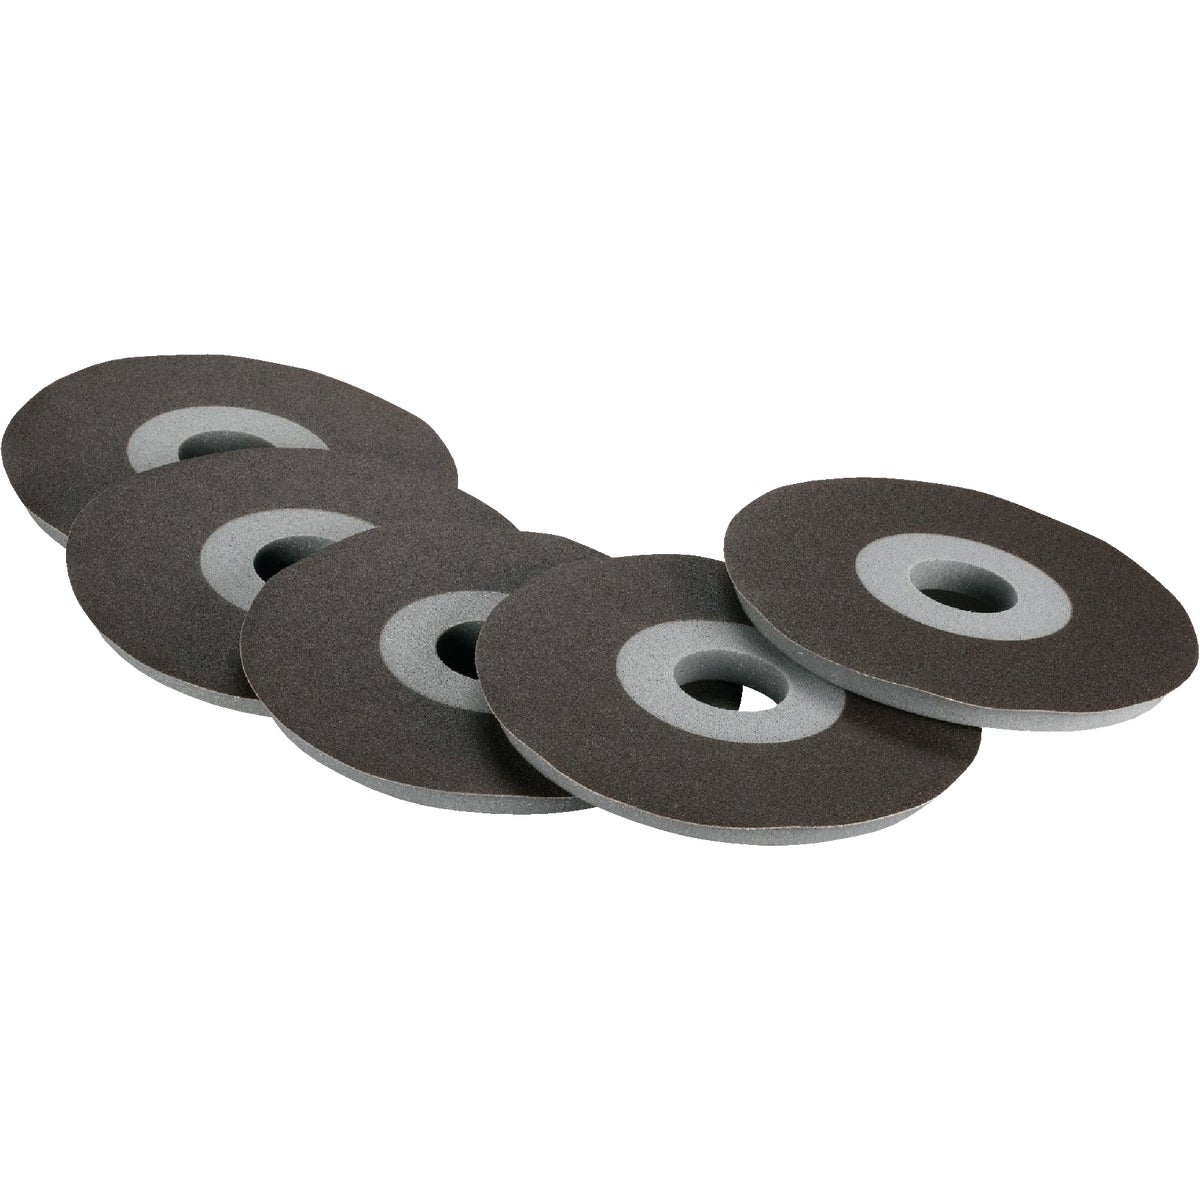 Porter Cable 8- 150 Grit Drywall Sanding Disc (5-Pack)